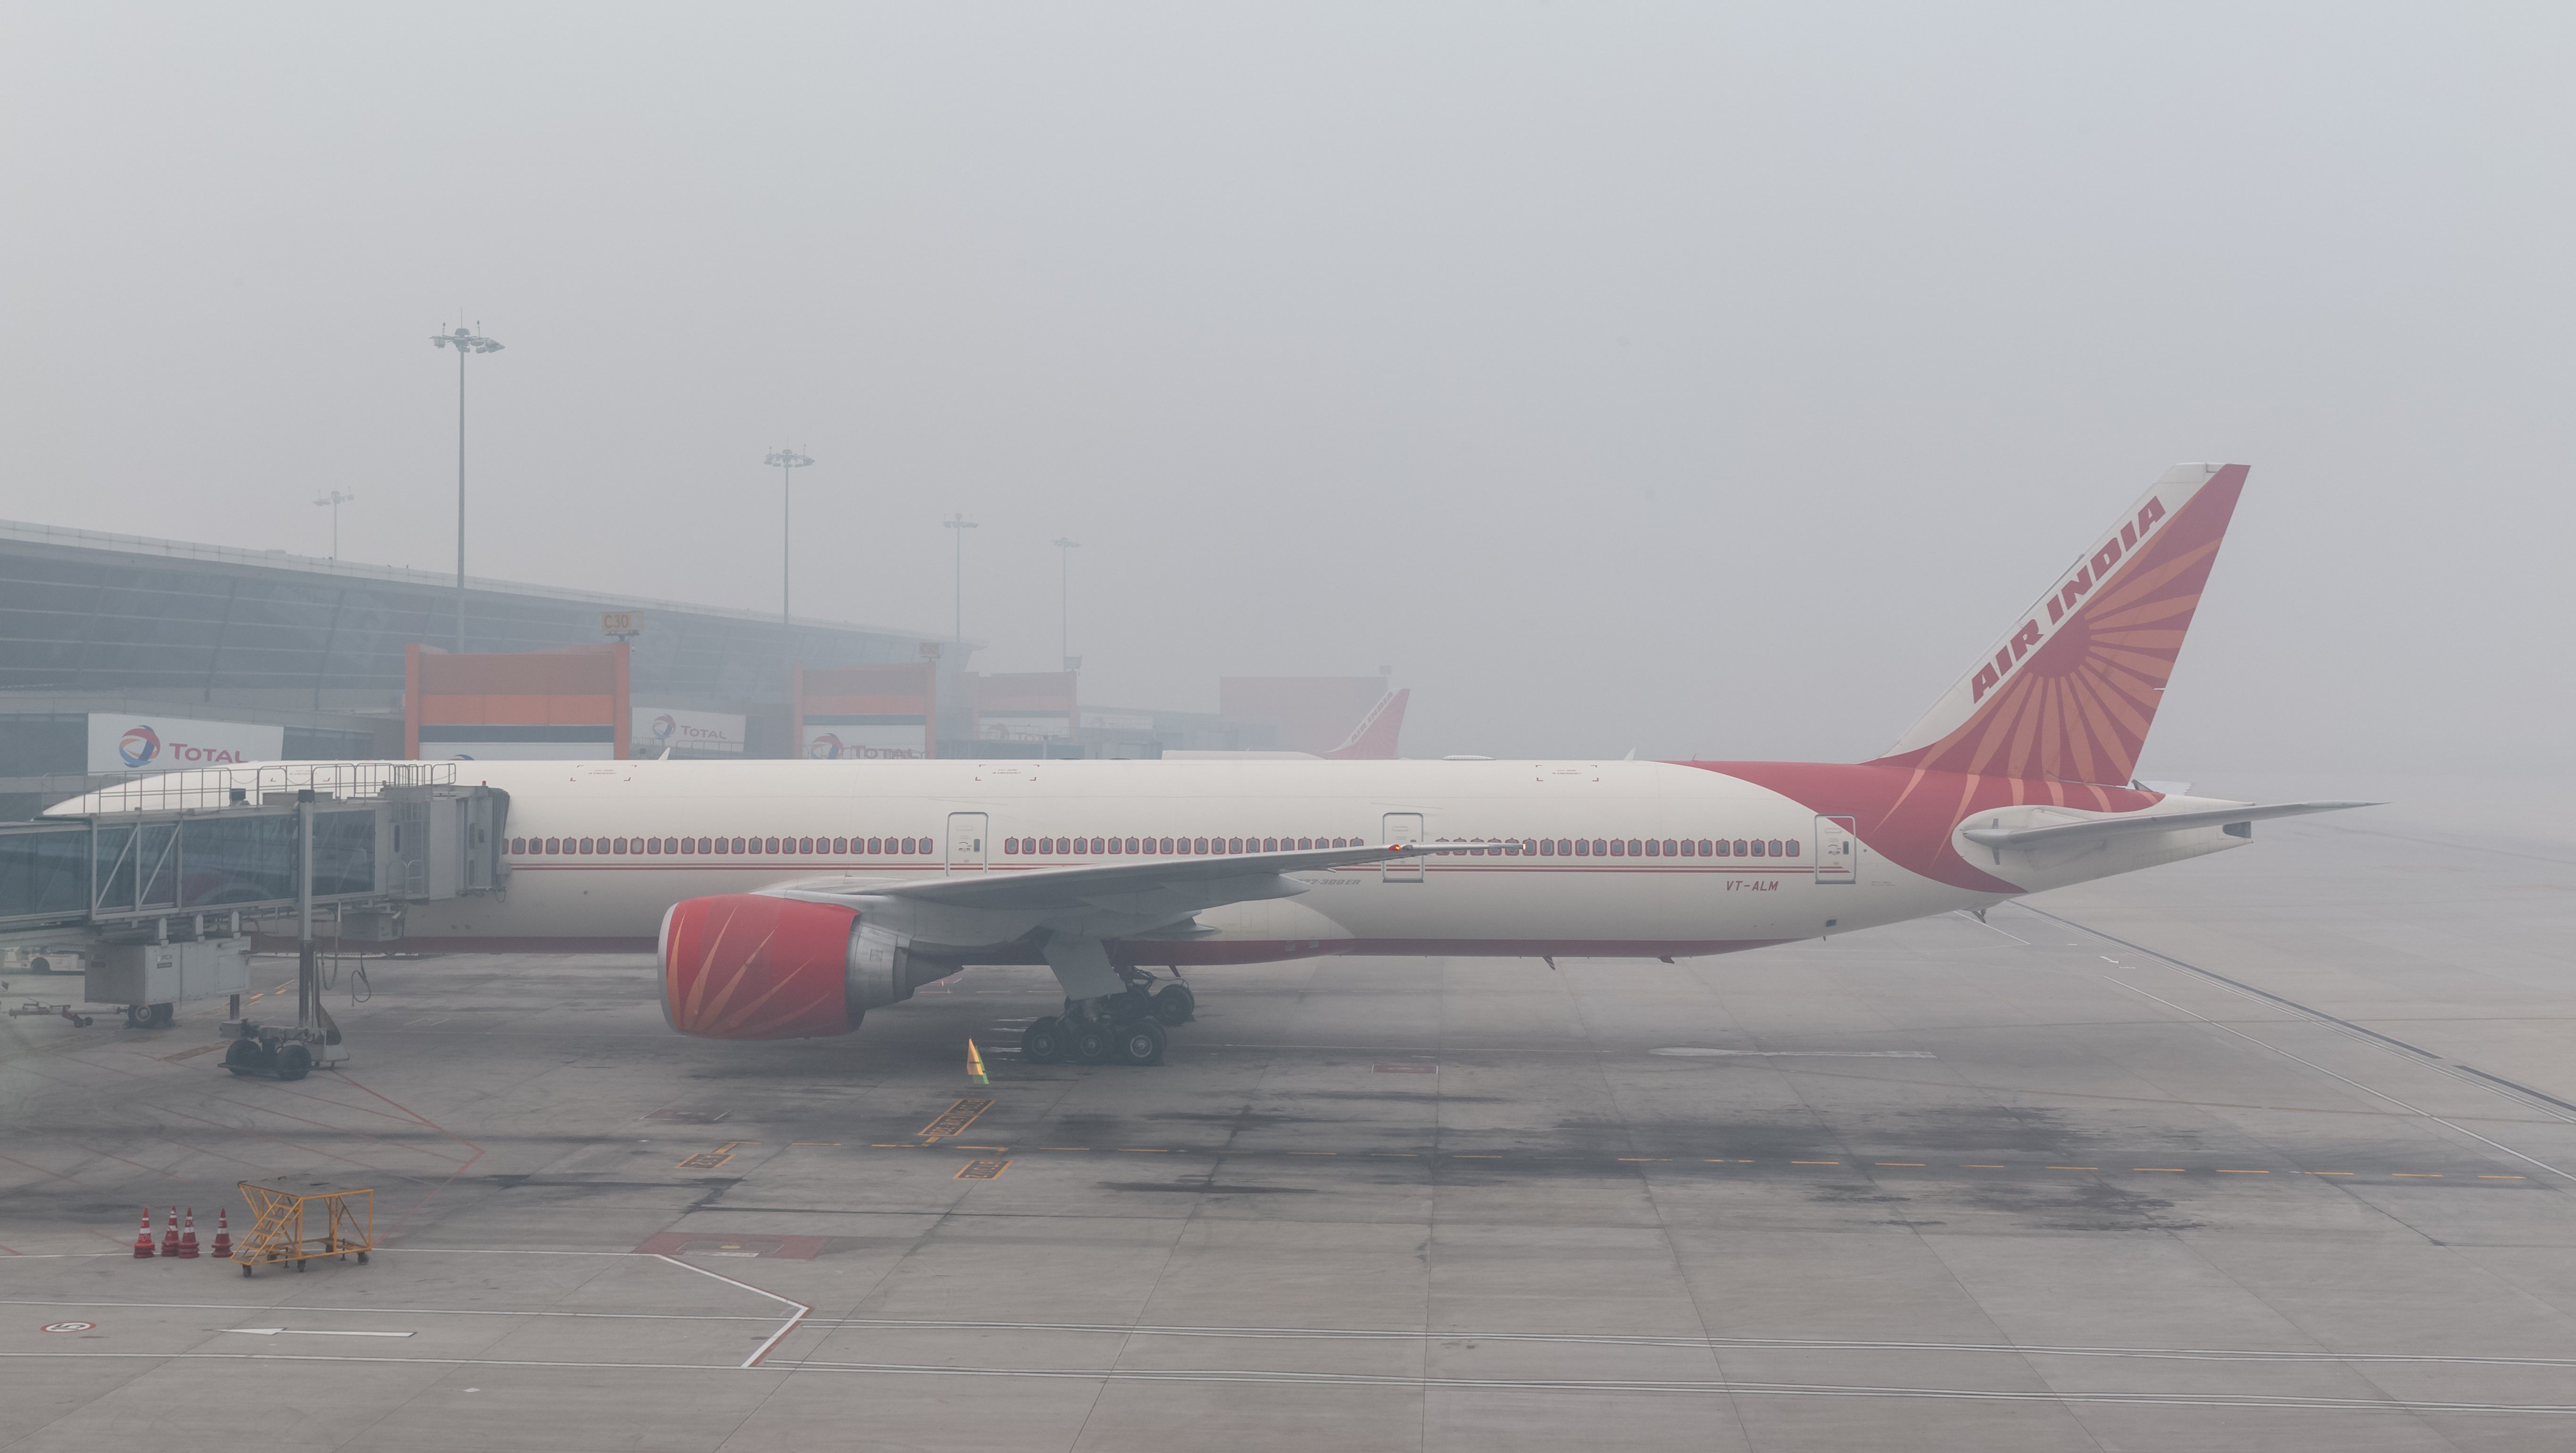 An Air India Boeing 777 aircraft parked at Delhi Airport on a foggy day.